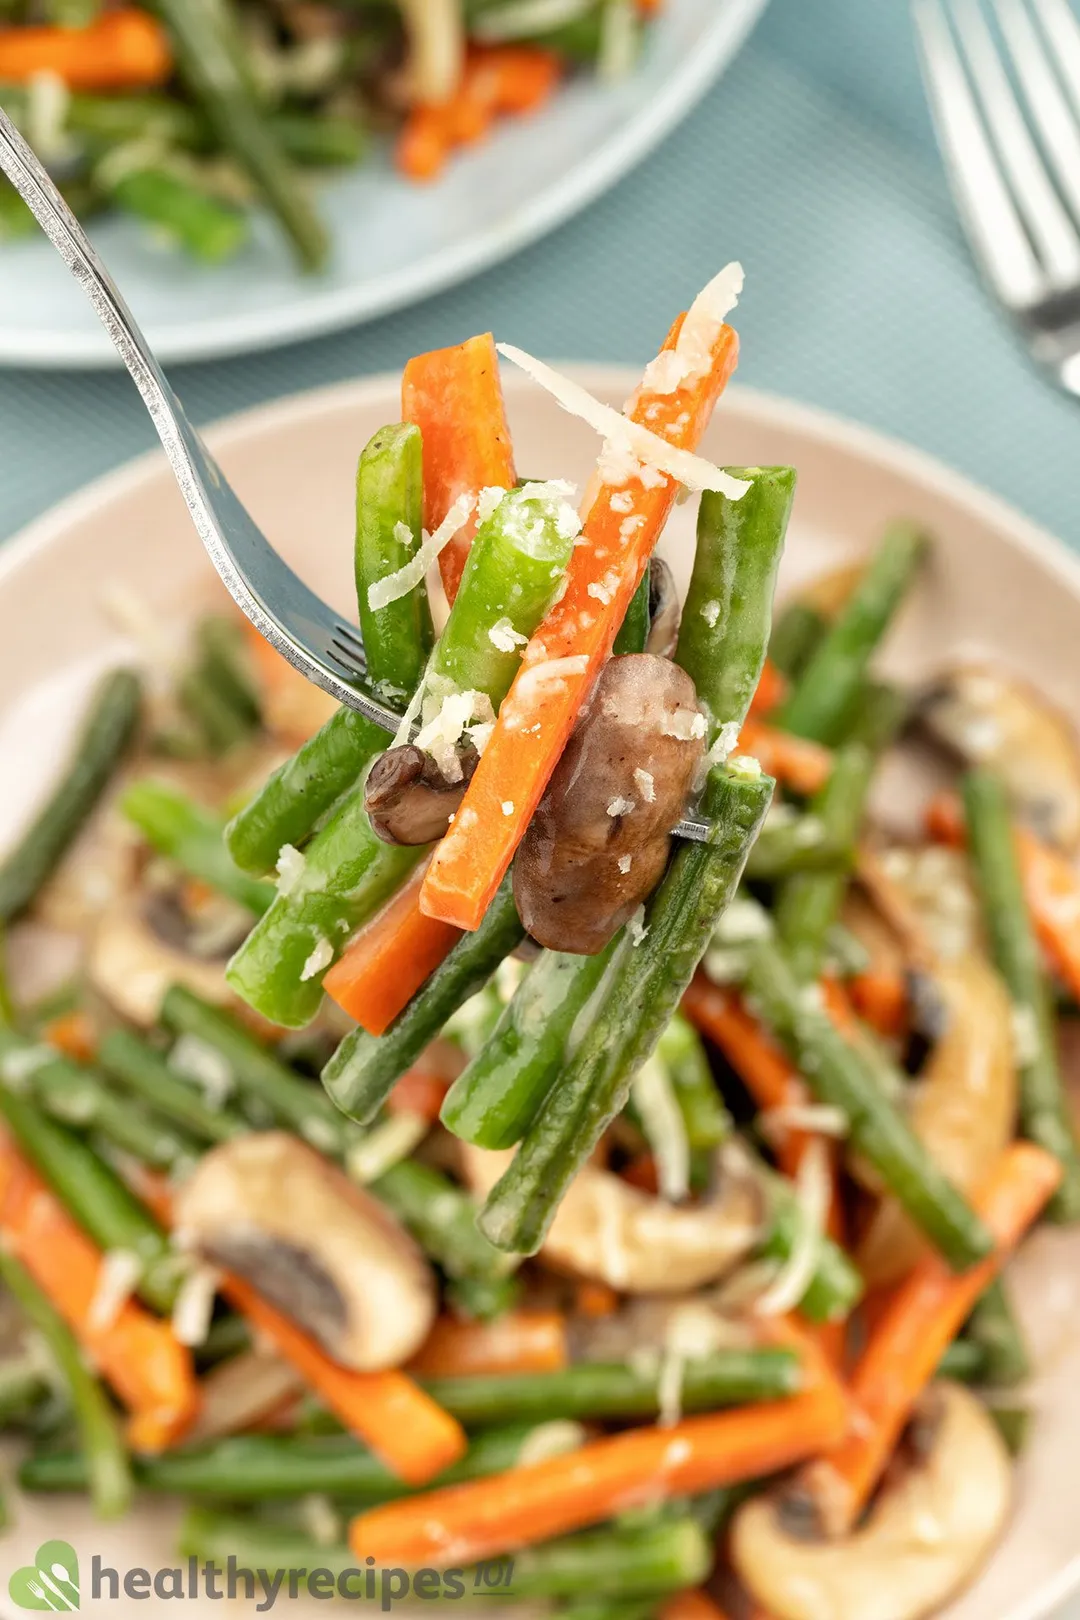 A fork piercing into green beans and julienned carrots.